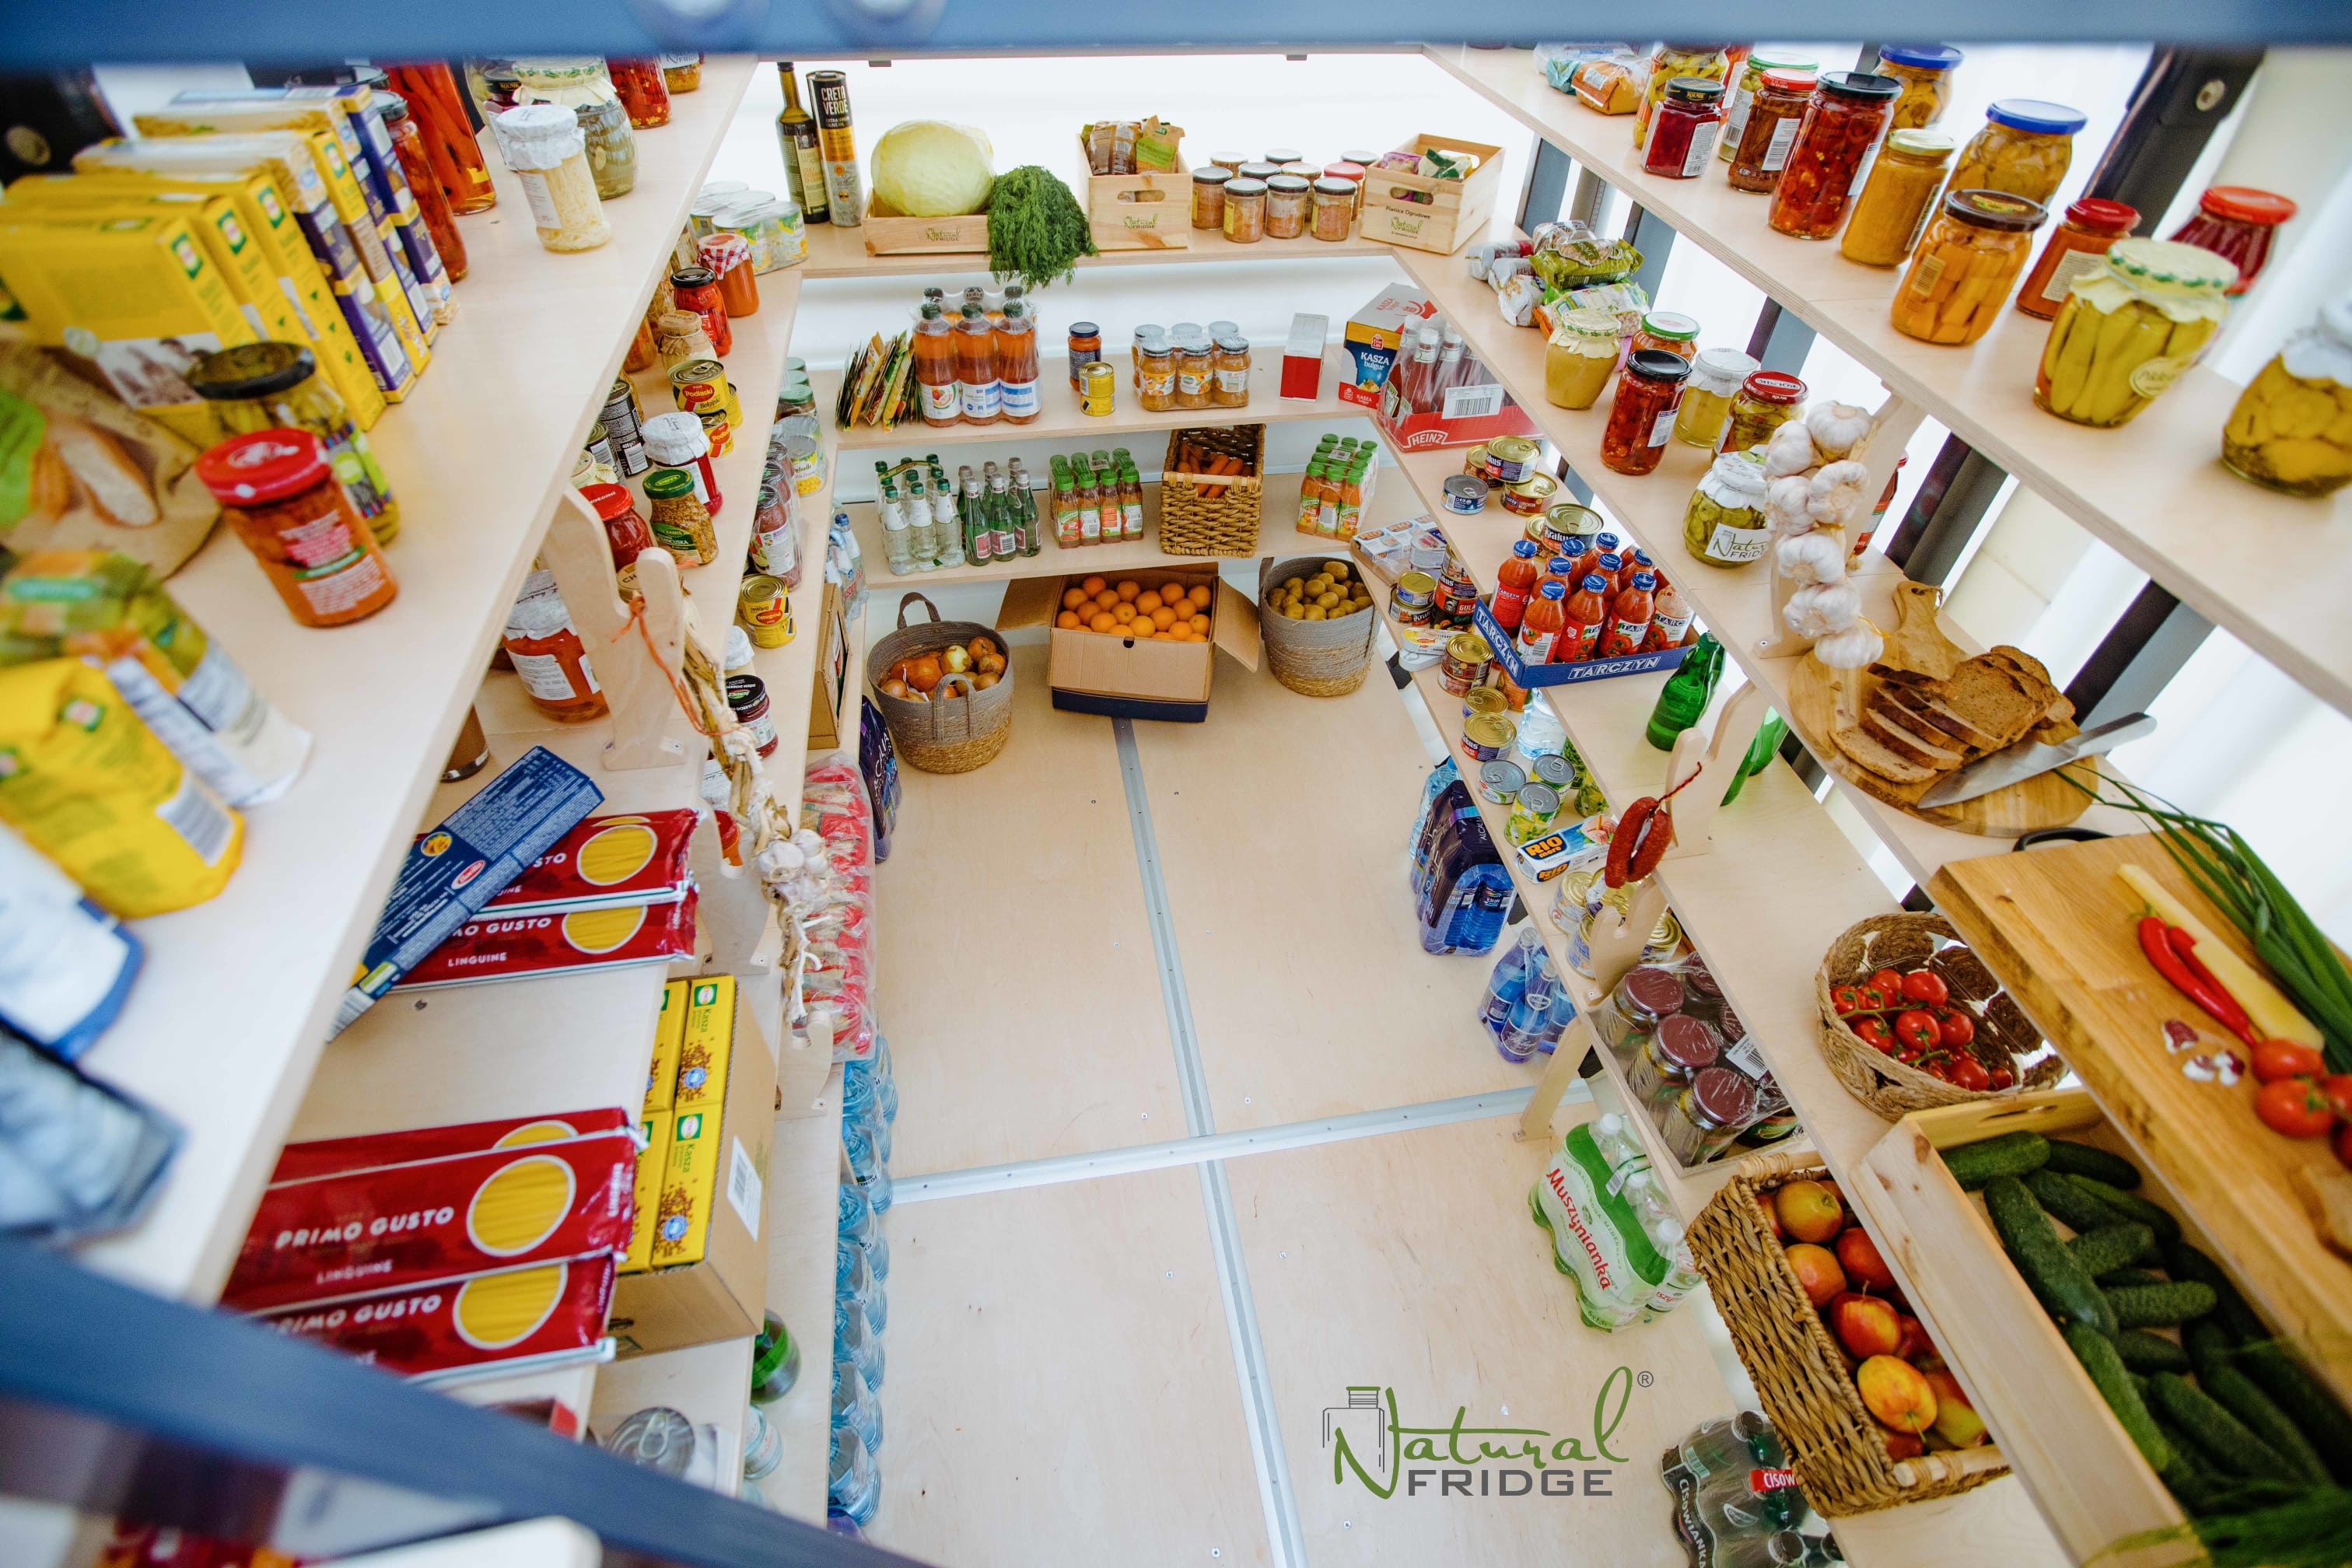 The cellar provides a lot of space inside. The floor area is up to 6.6 m2. This allows you to store many vegetables in bags directly on the floor. Arranging preserves on the shelves is very convenient. Cellar 200x330 Natural Fridge Gross price 9 019 EUR